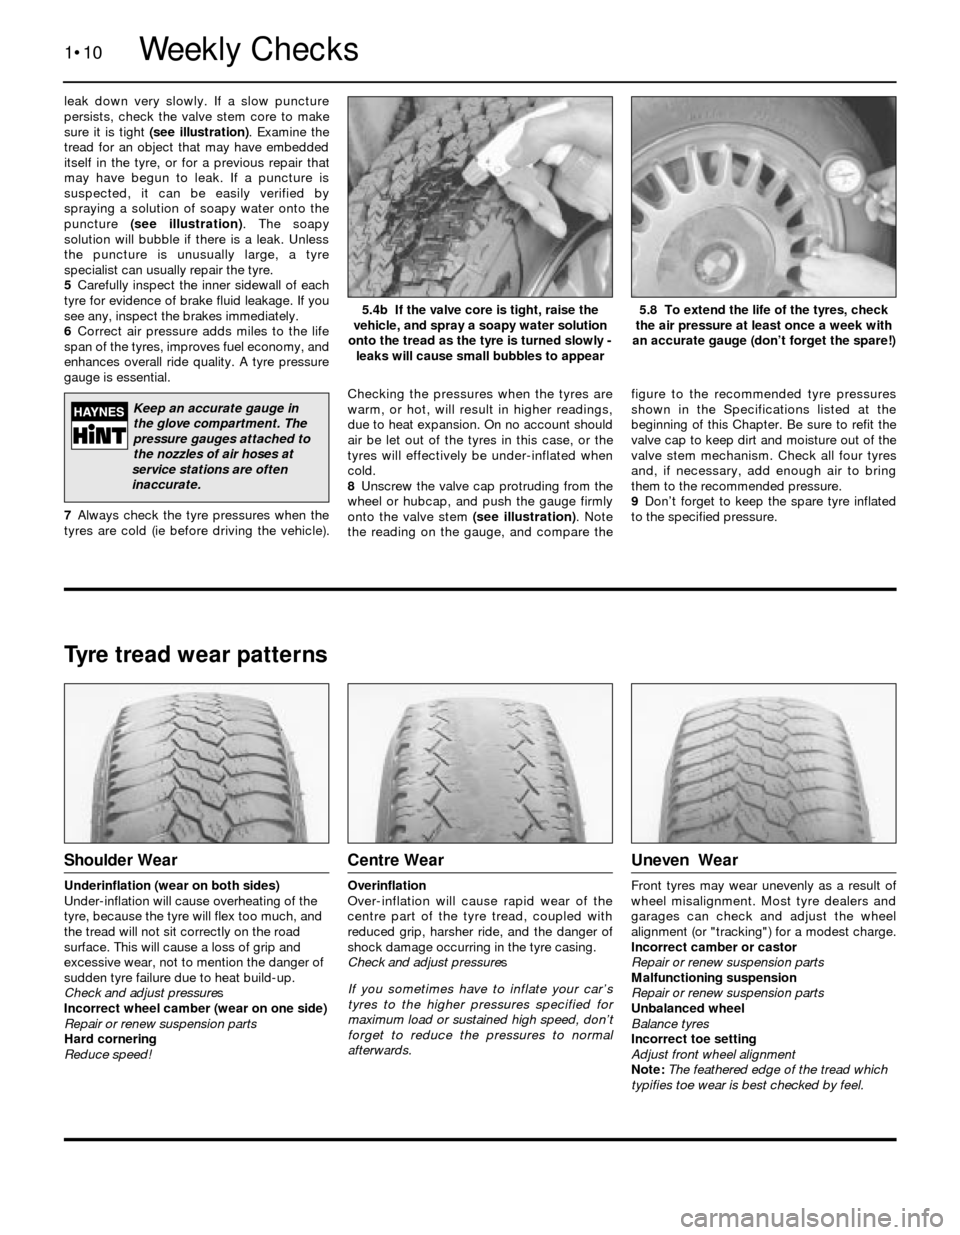 BMW 3 SERIES 1989 E30 Workshop Manual leak down very slowly. If a slow puncture
persists, check the valve stem core to make
sure it is tight (see illustration). Examine the
tread for an object that may have embedded
itself in the tyre, or